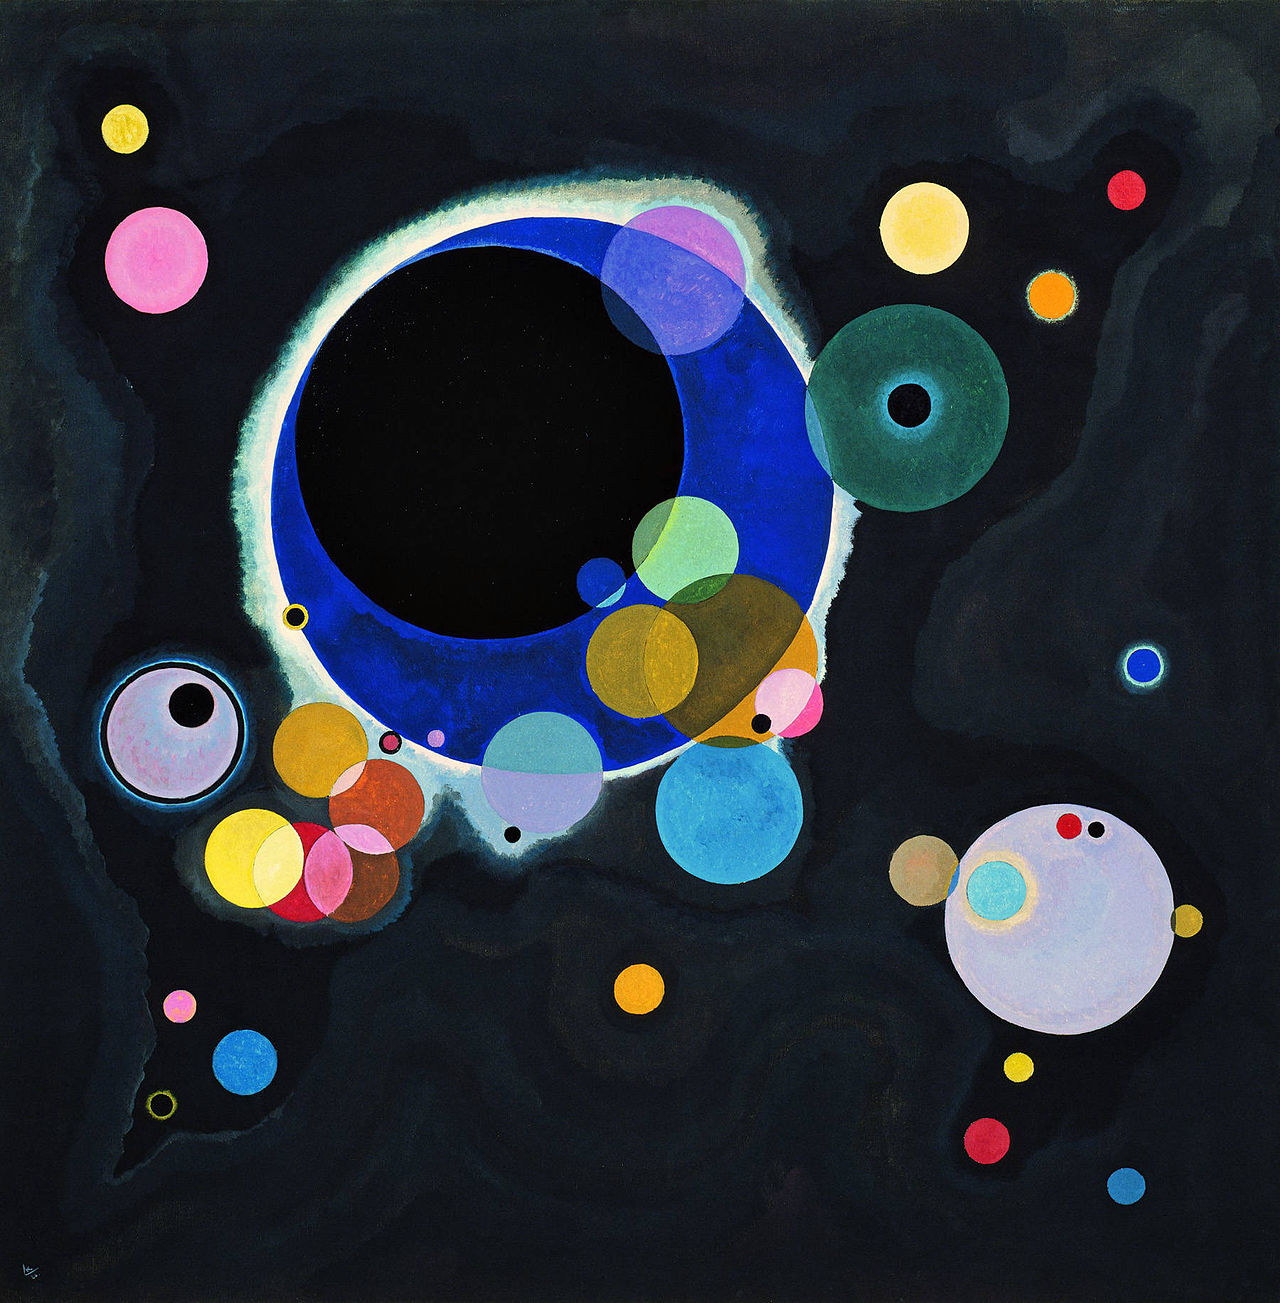 Painting by Kandinsky: overlapping circles of various colors on a black background; some circles are filled in with a solid color, some are filled in with a translucent color, others are just the outline of a circle with various outline thickness, some filled circles have a border of a different color; the black background has some variations in darkness